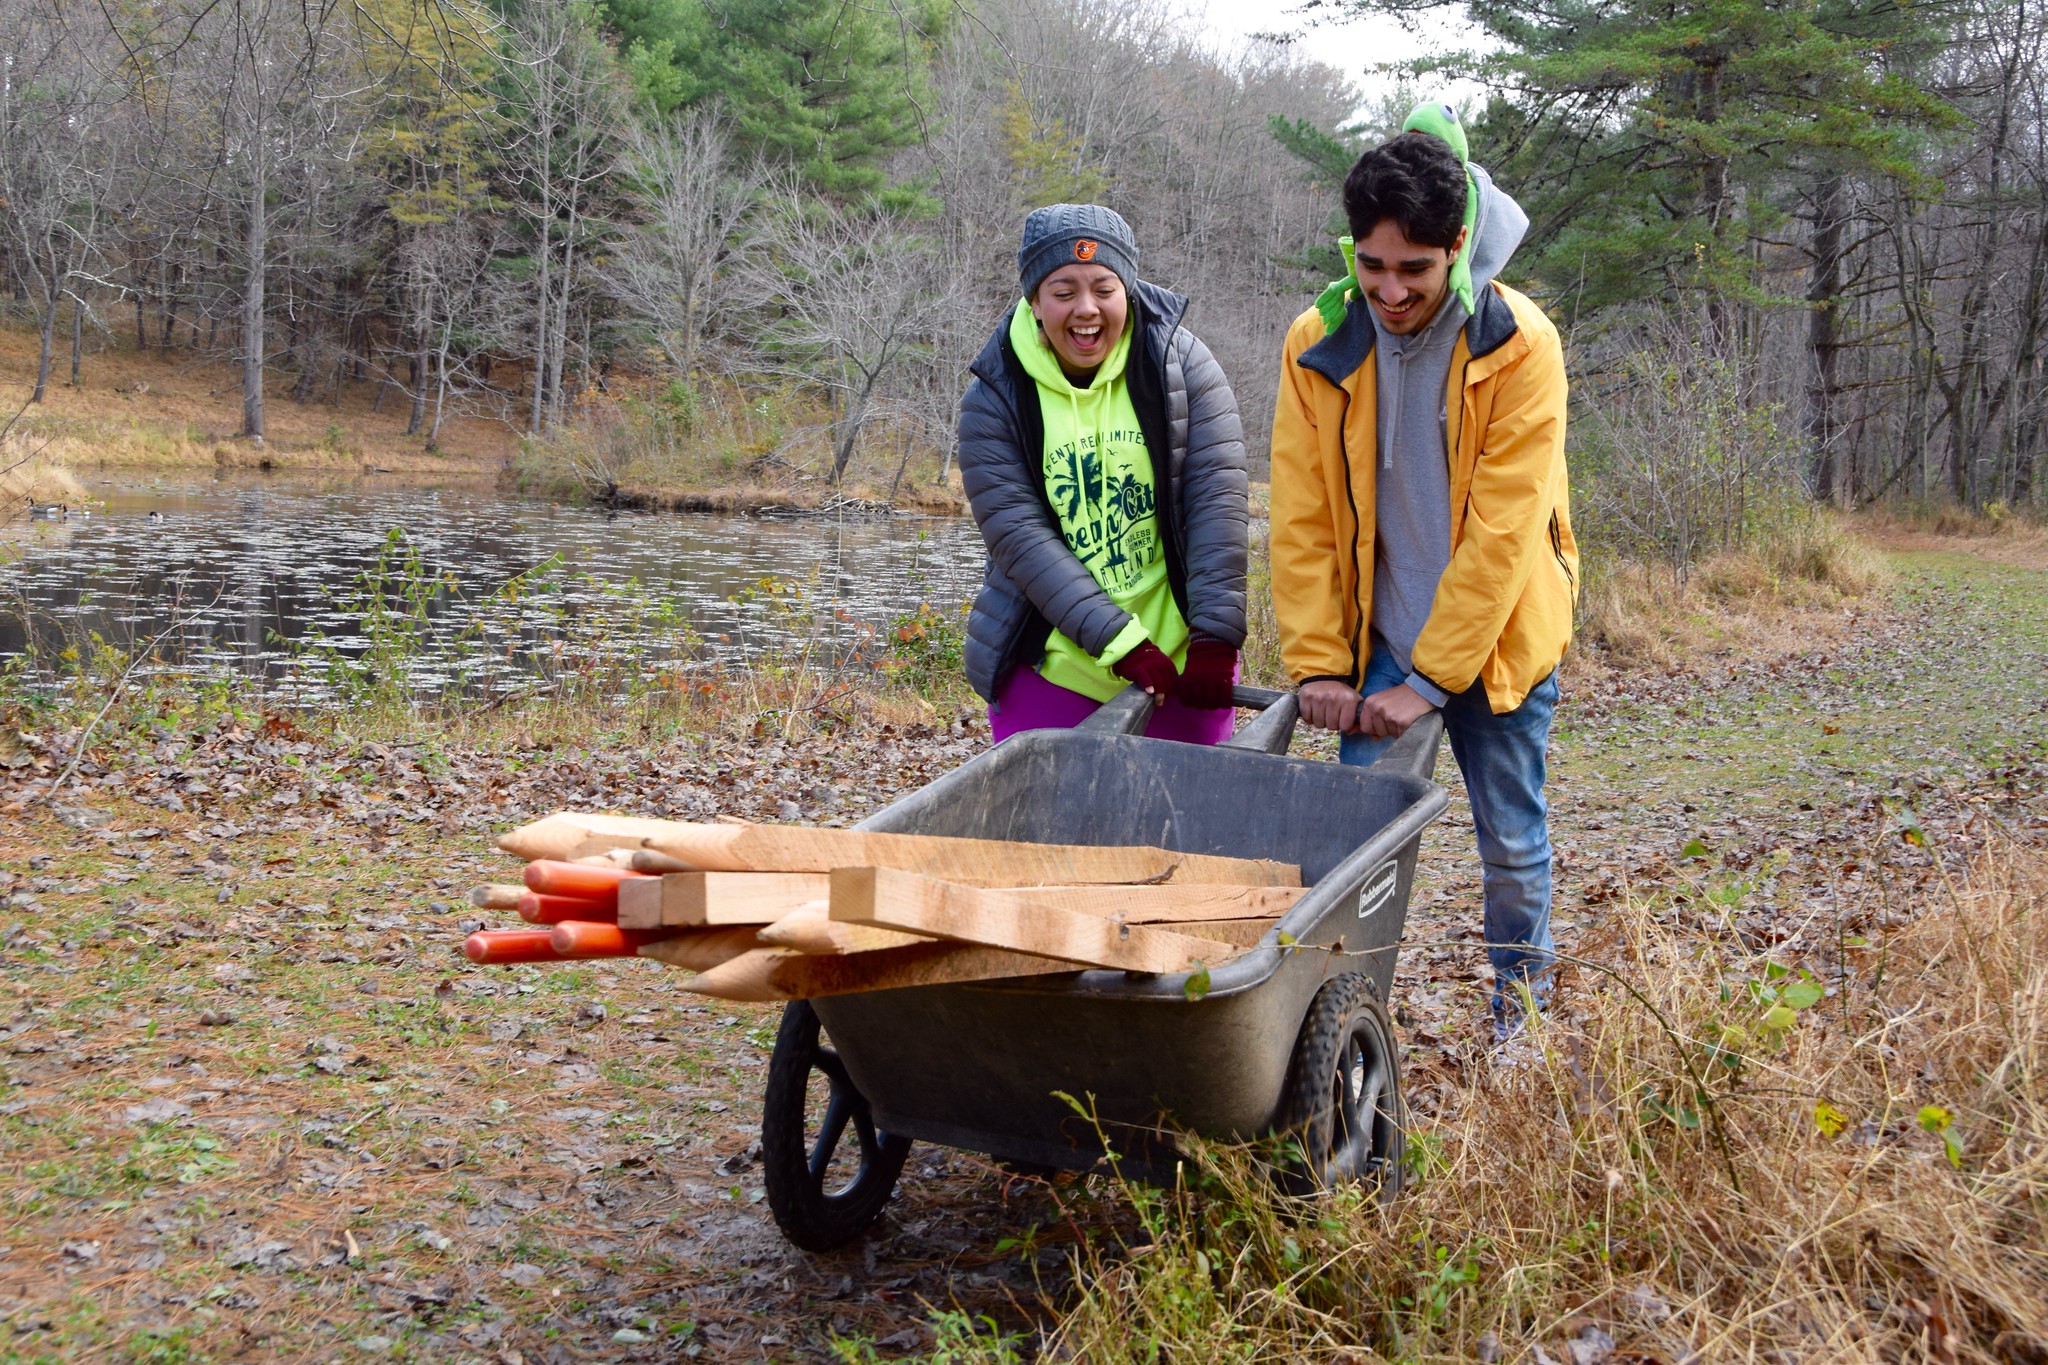 Students move wheel barrel at Maydale Conservation Park